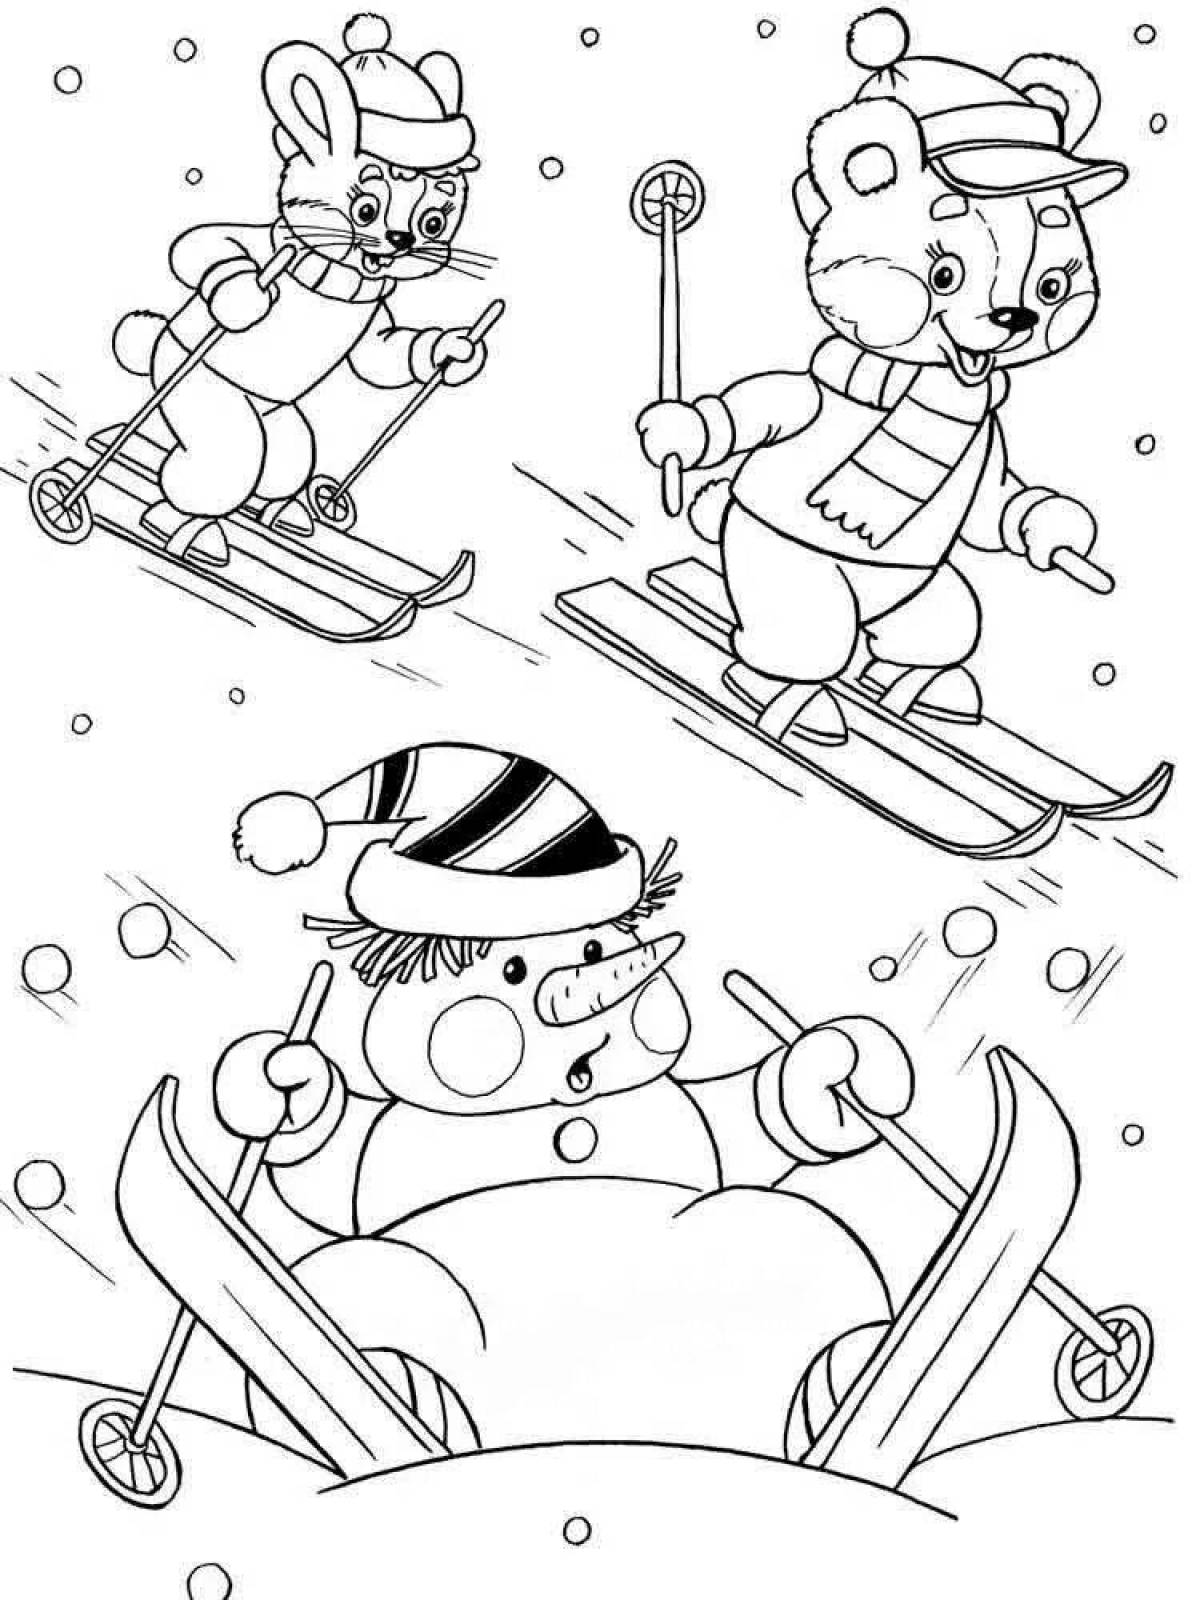 Rampant Bunny and Snowman Coloring Page